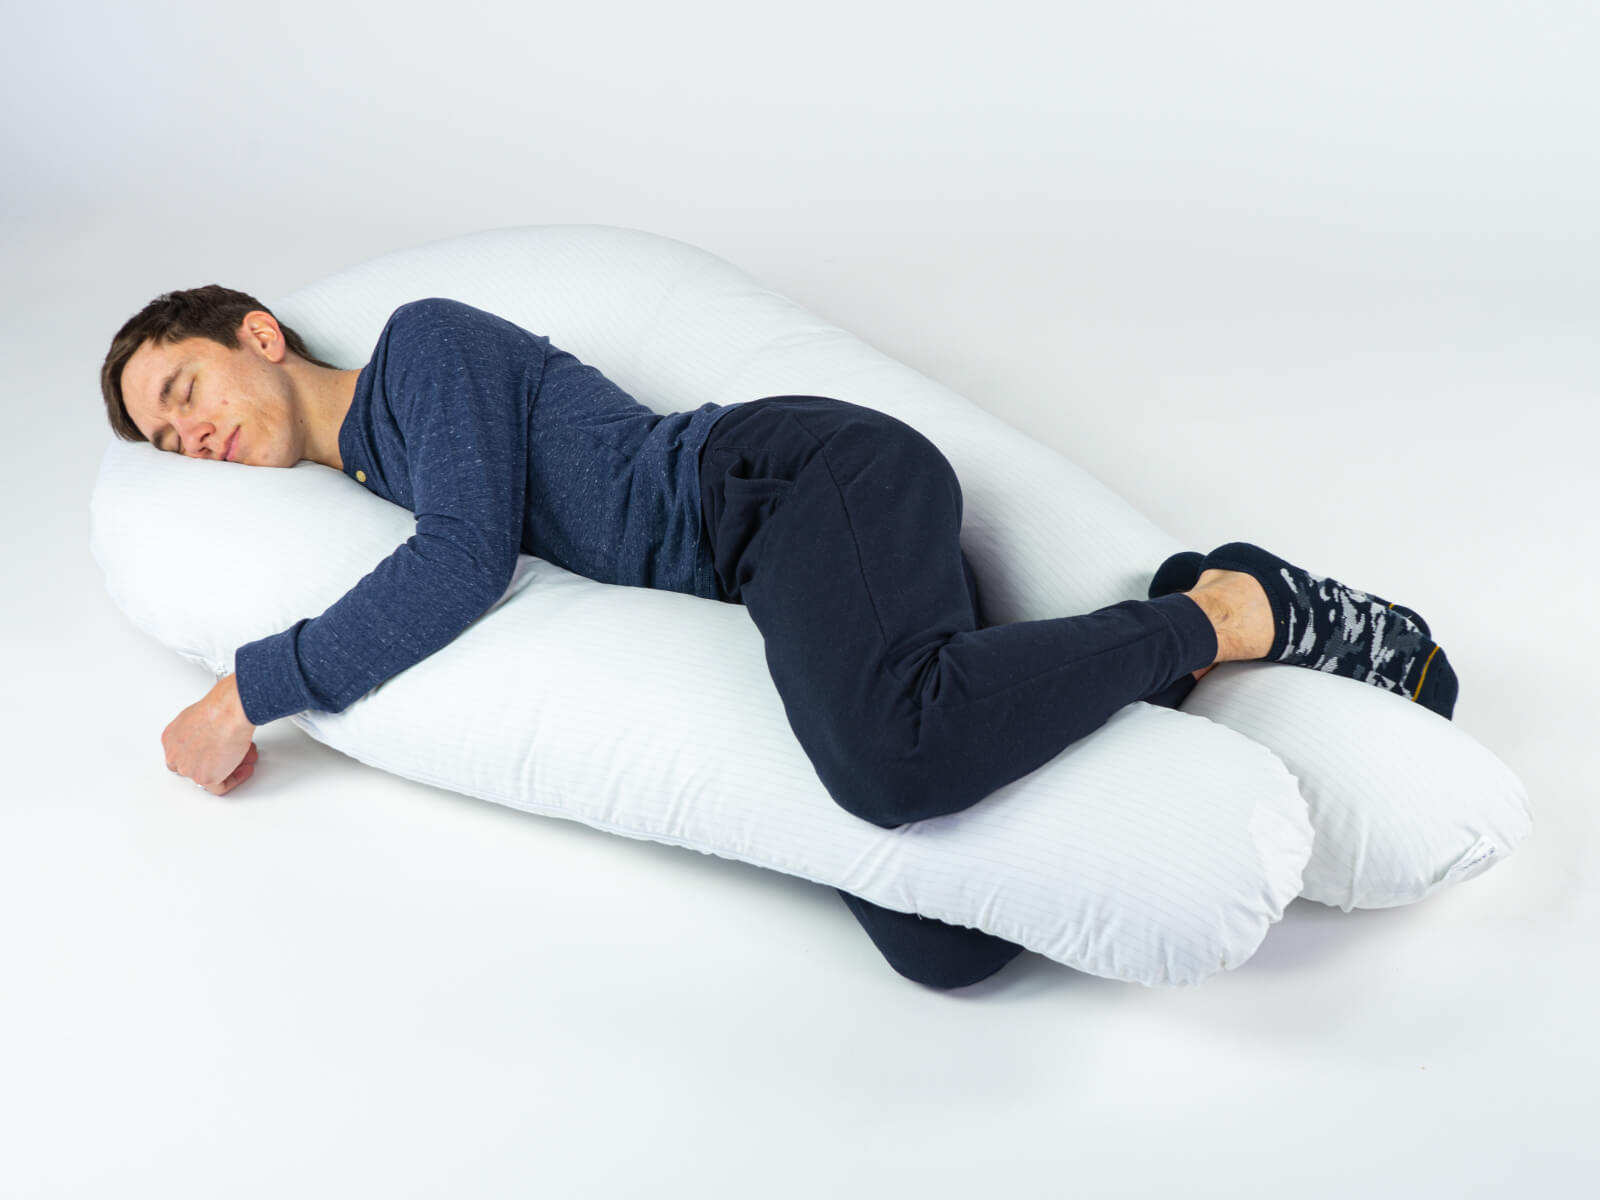 Knee Pillow Cover - COMFYCENTRE®